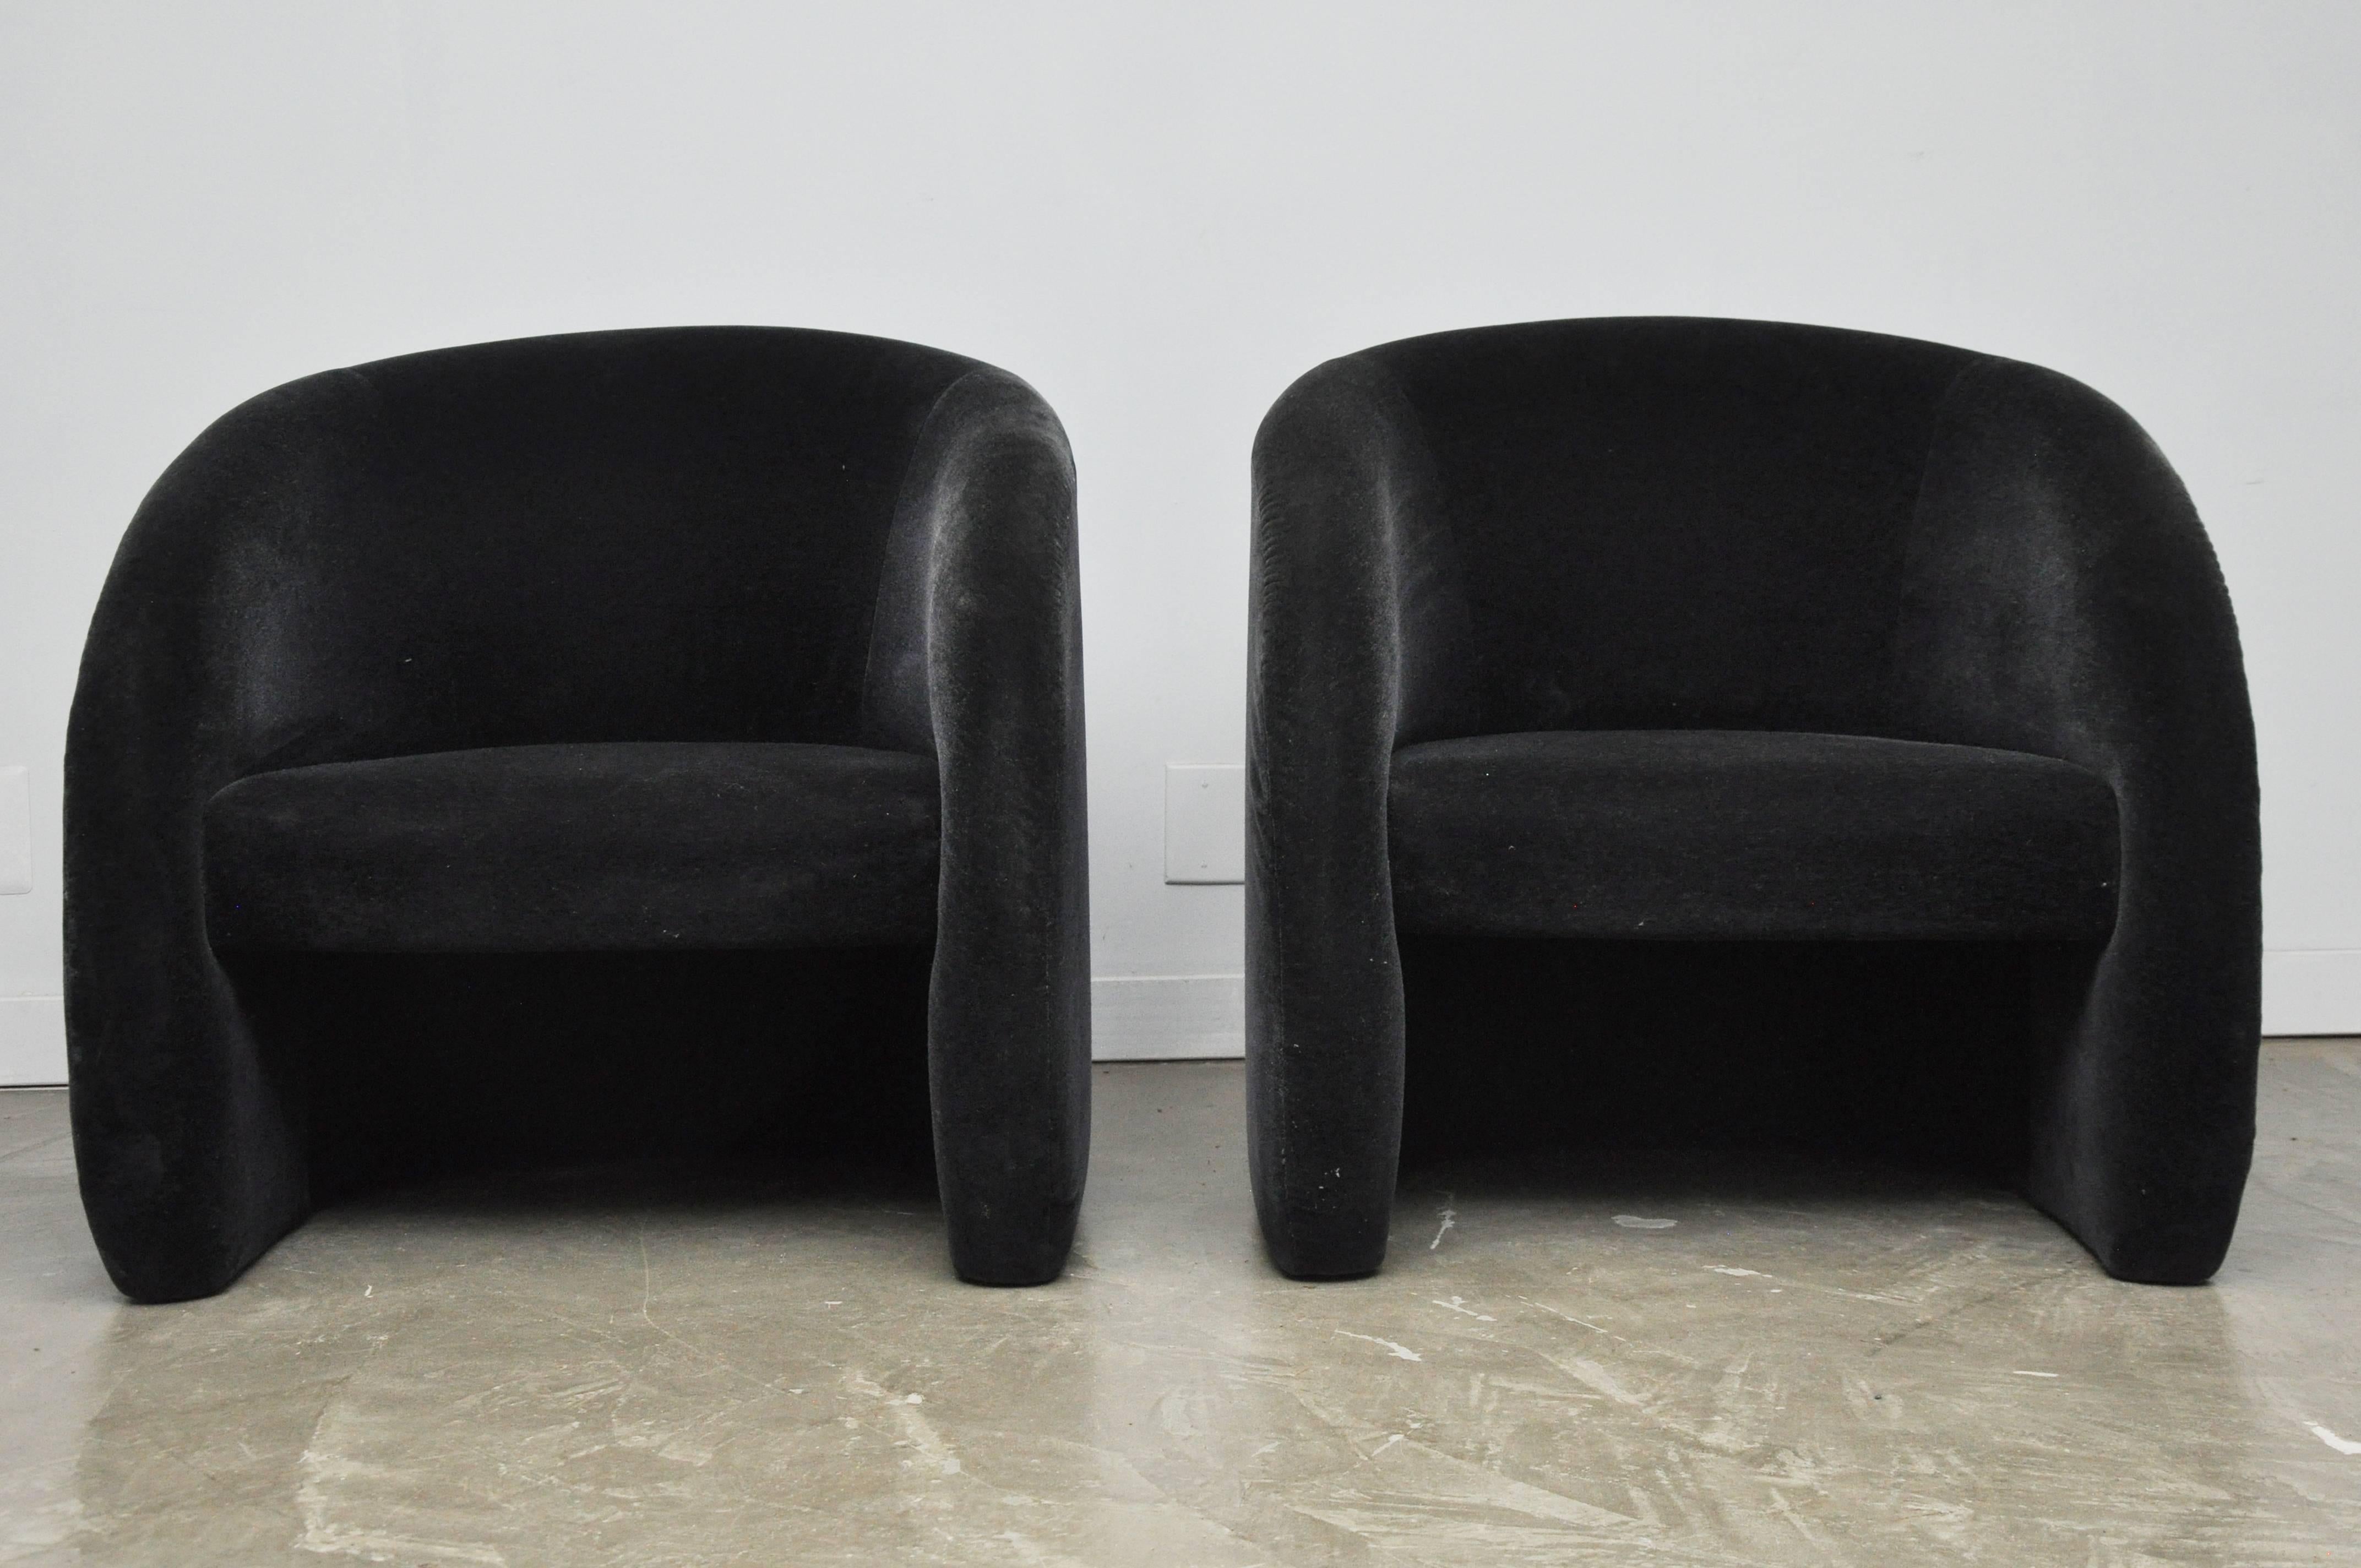 Pair of curvaceous barrel back lounge chairs by Brueton. Original black Mohair is in excellent condition.